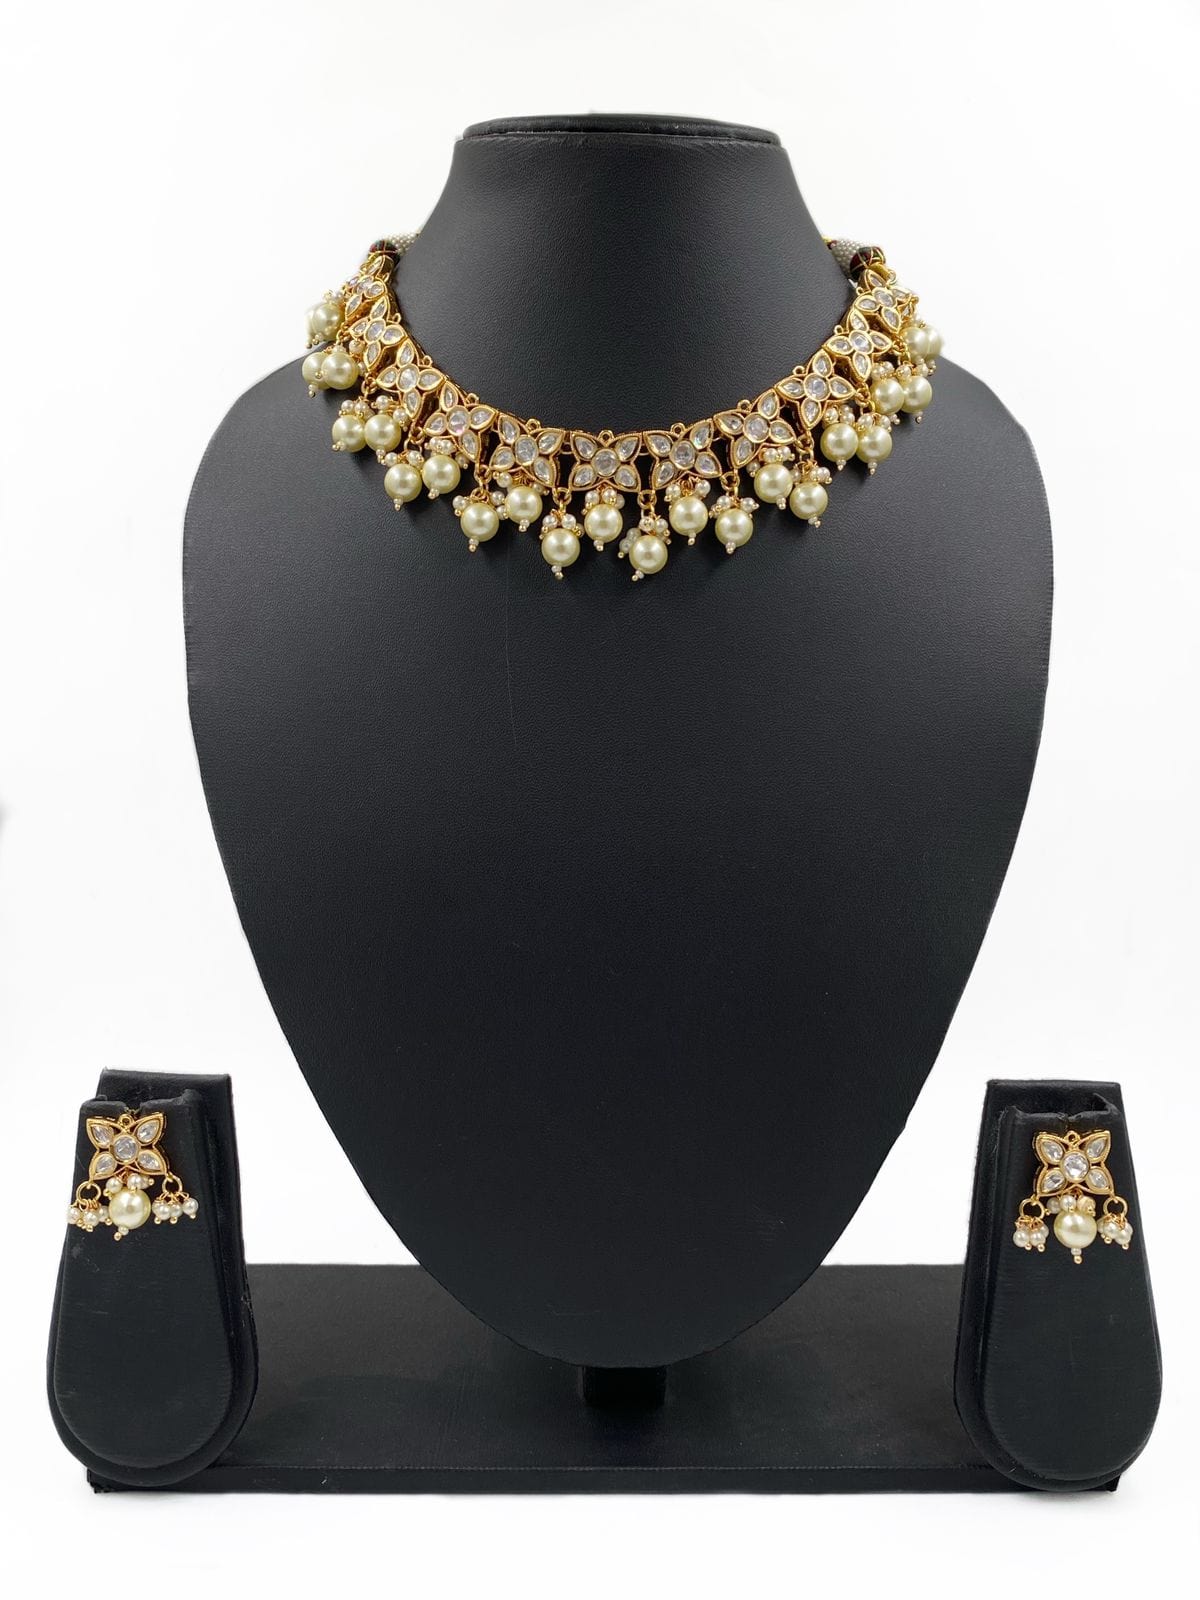 Bhavya Simple Polki And Pearls Party Wear Necklace Set By Gehna Shop Choker Necklace Set